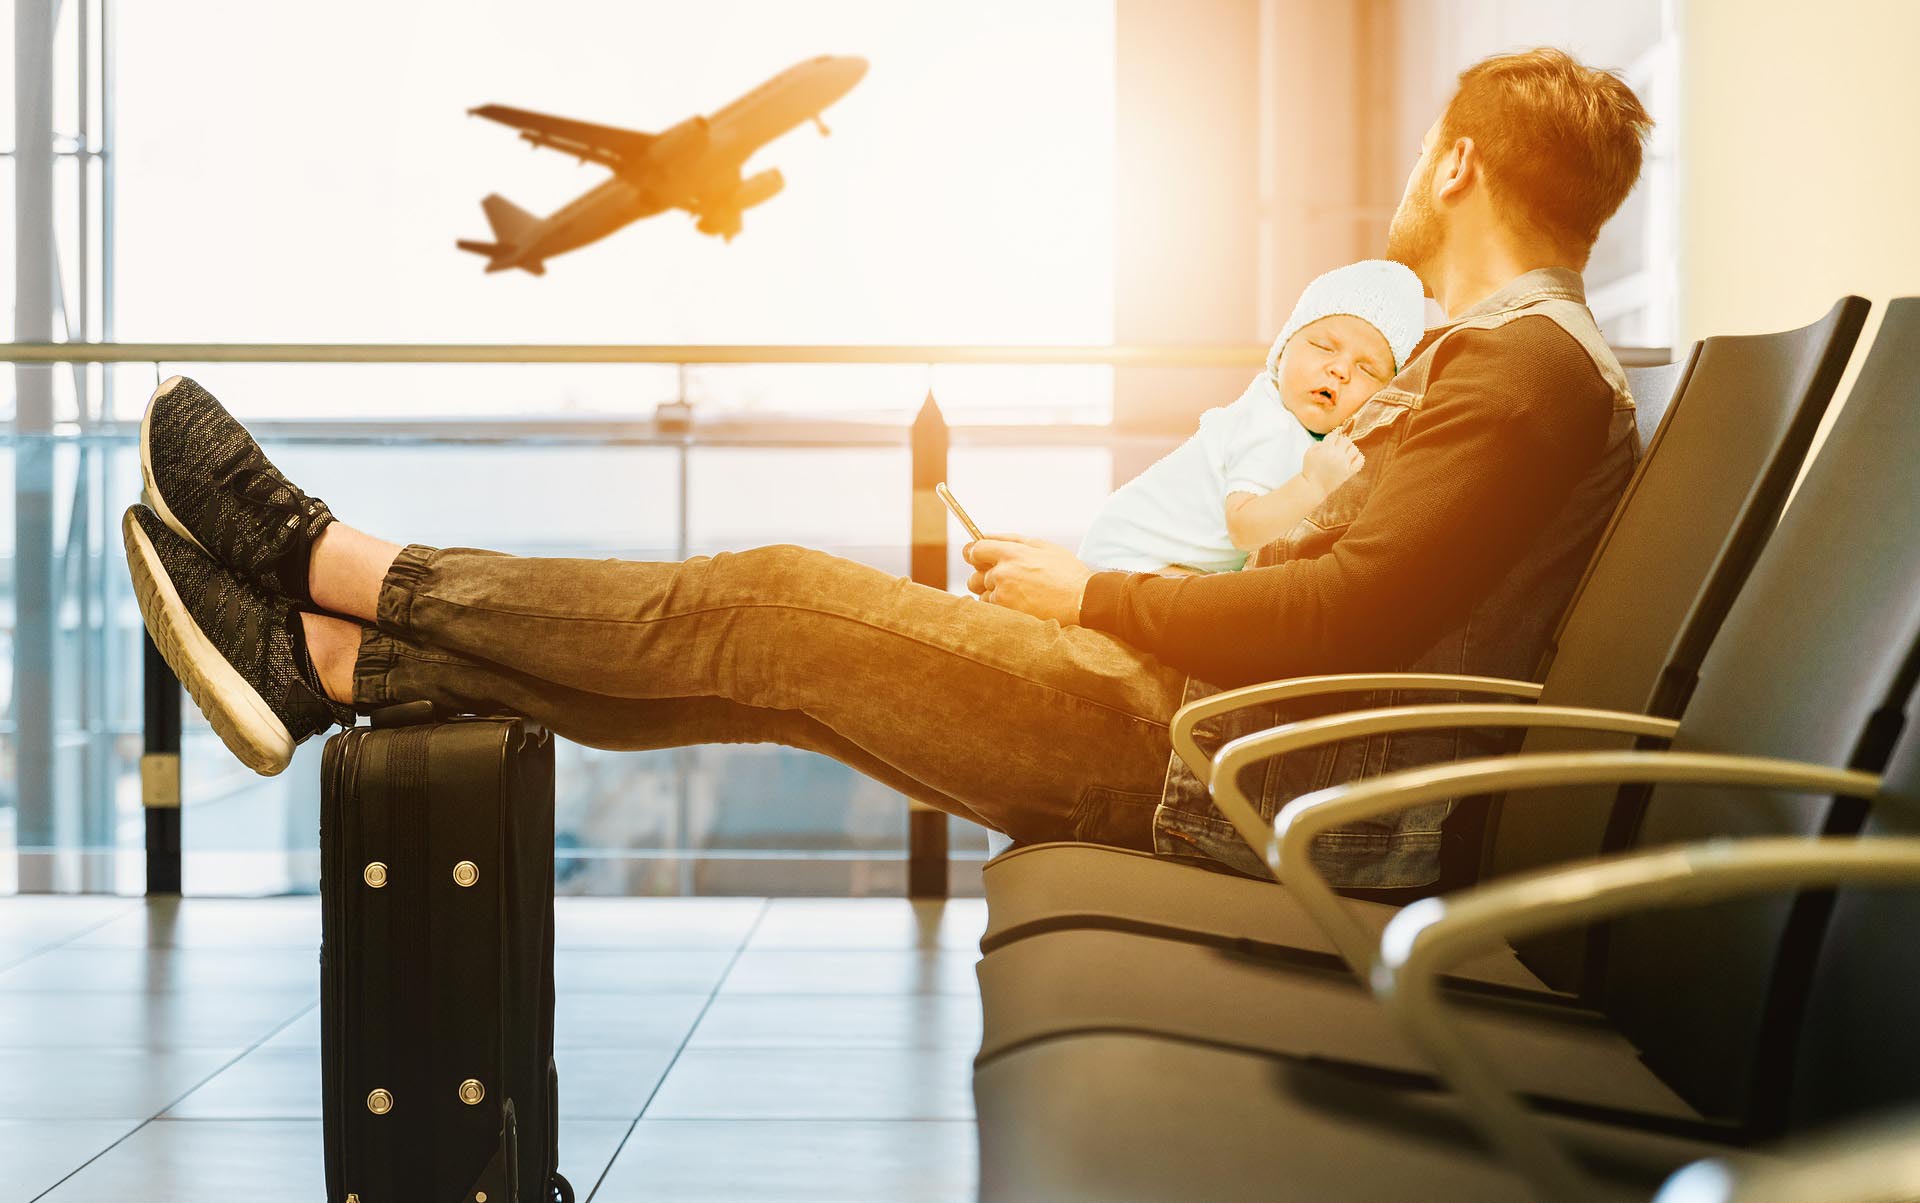 Tips For Airplane Travel With a Baby